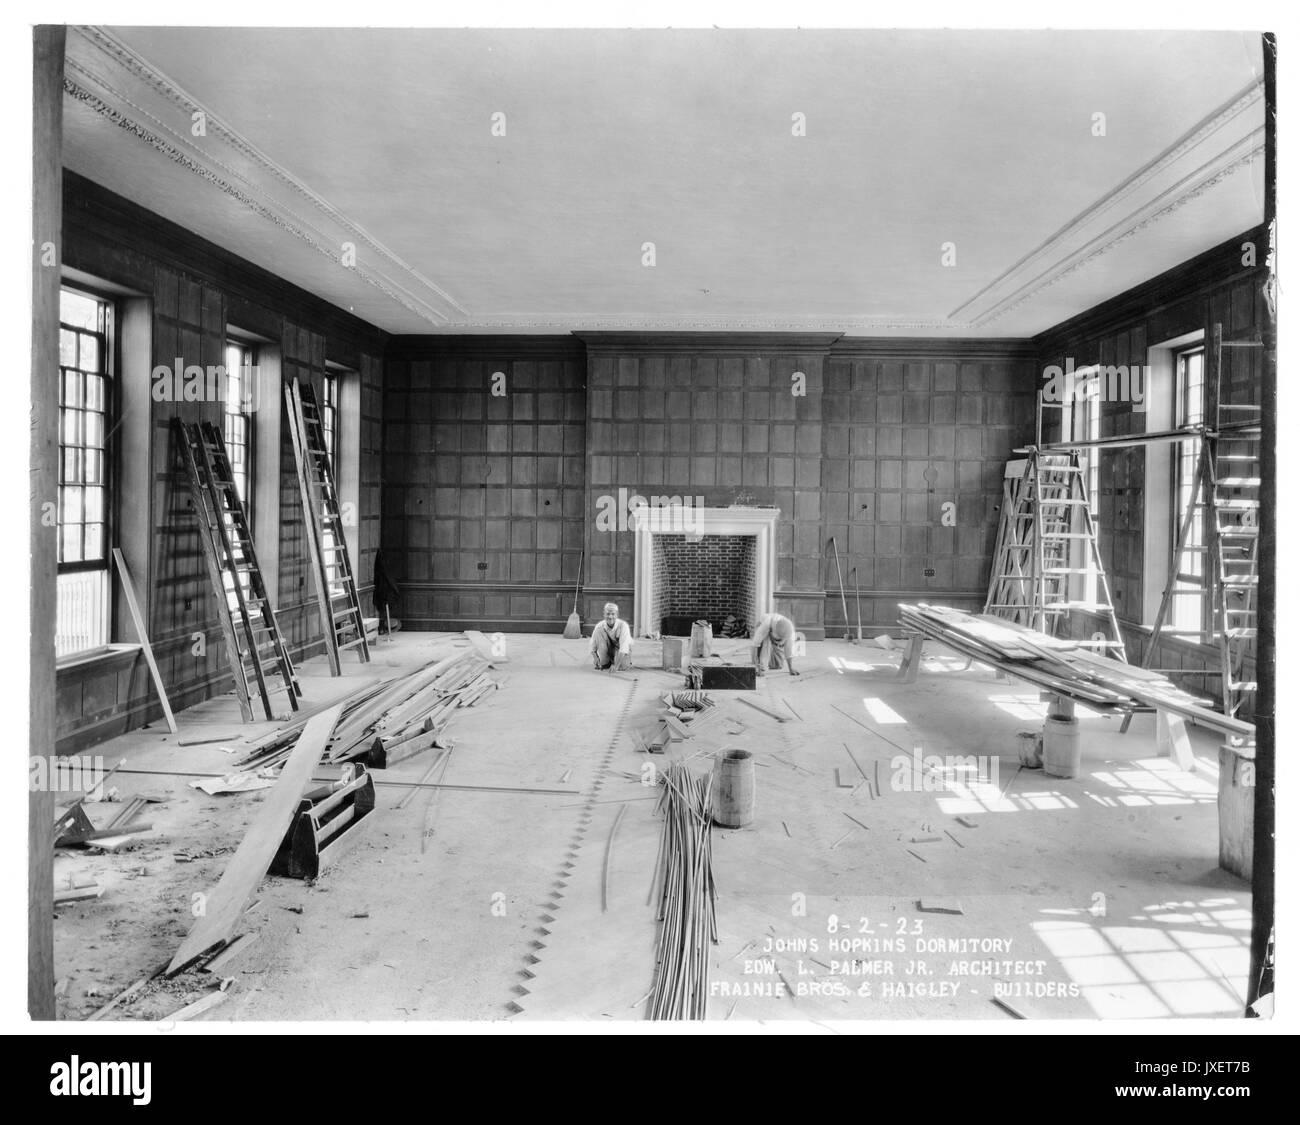 Alumni Memorial Residences Interior of AMR, Unidentifed room, Two workers are laying floor tiles, Room has a fireplace and woodpaneling on the walls, 1923. Stock Photo